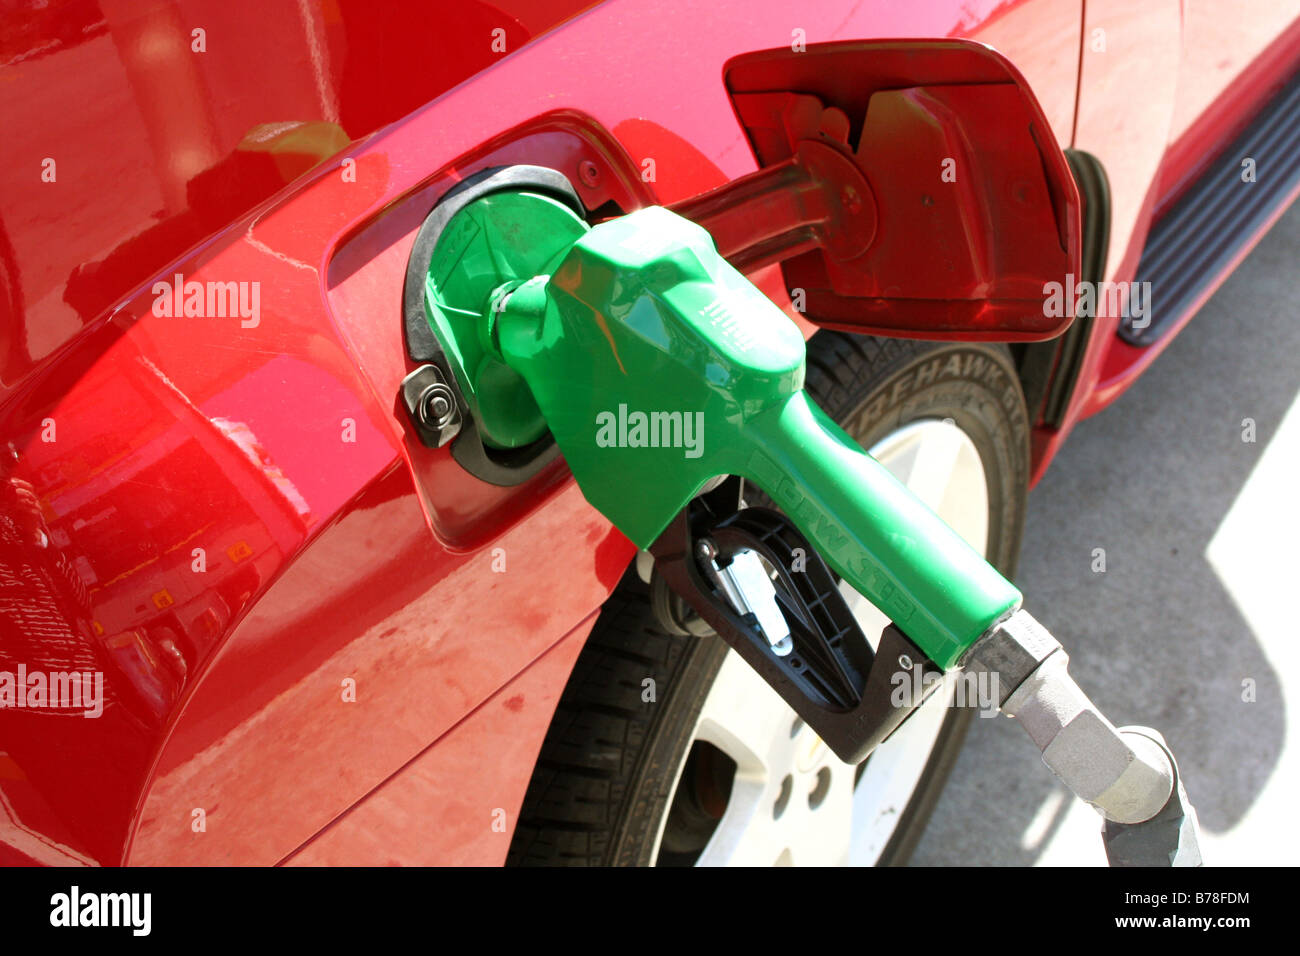 bright green gas pump in red car Stock Photo